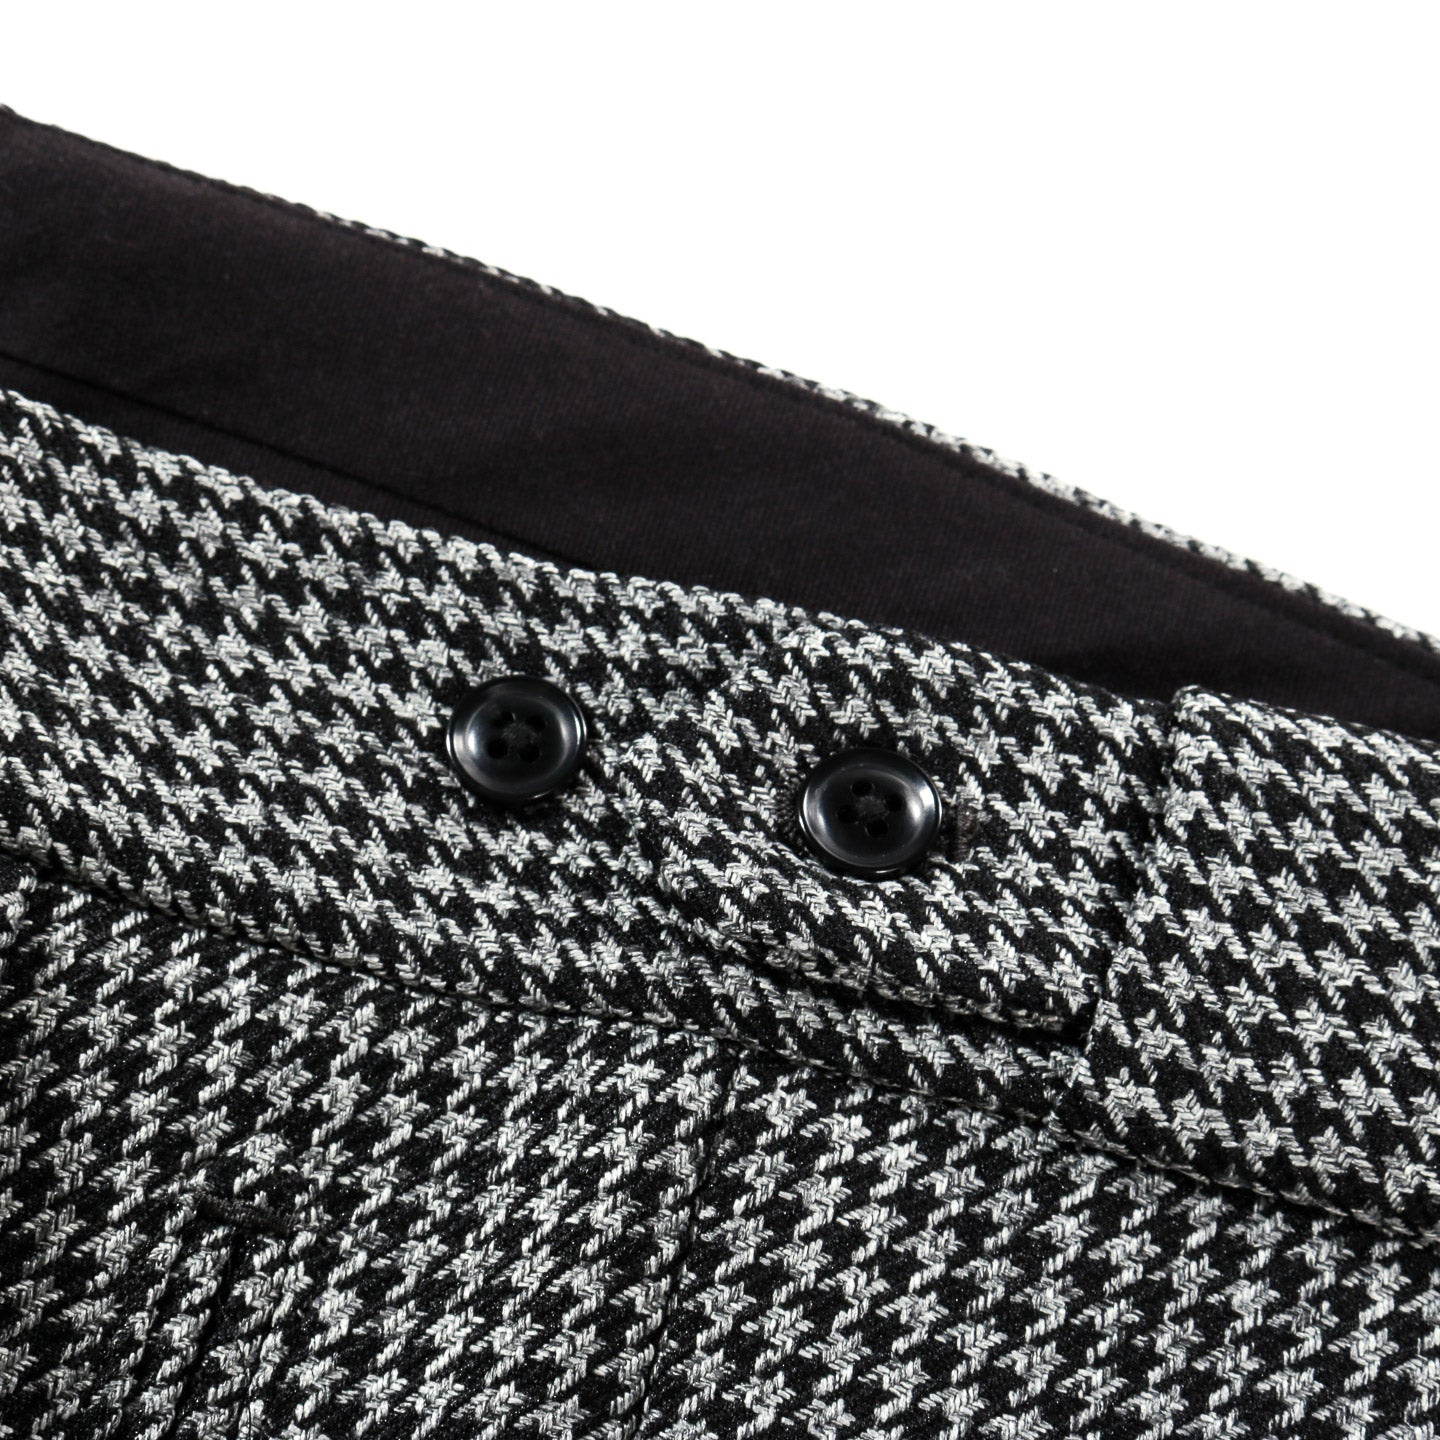 NEEDLES TUCKED SIDE TAB TROUSER POLY HOUNDSTOOTH GREY